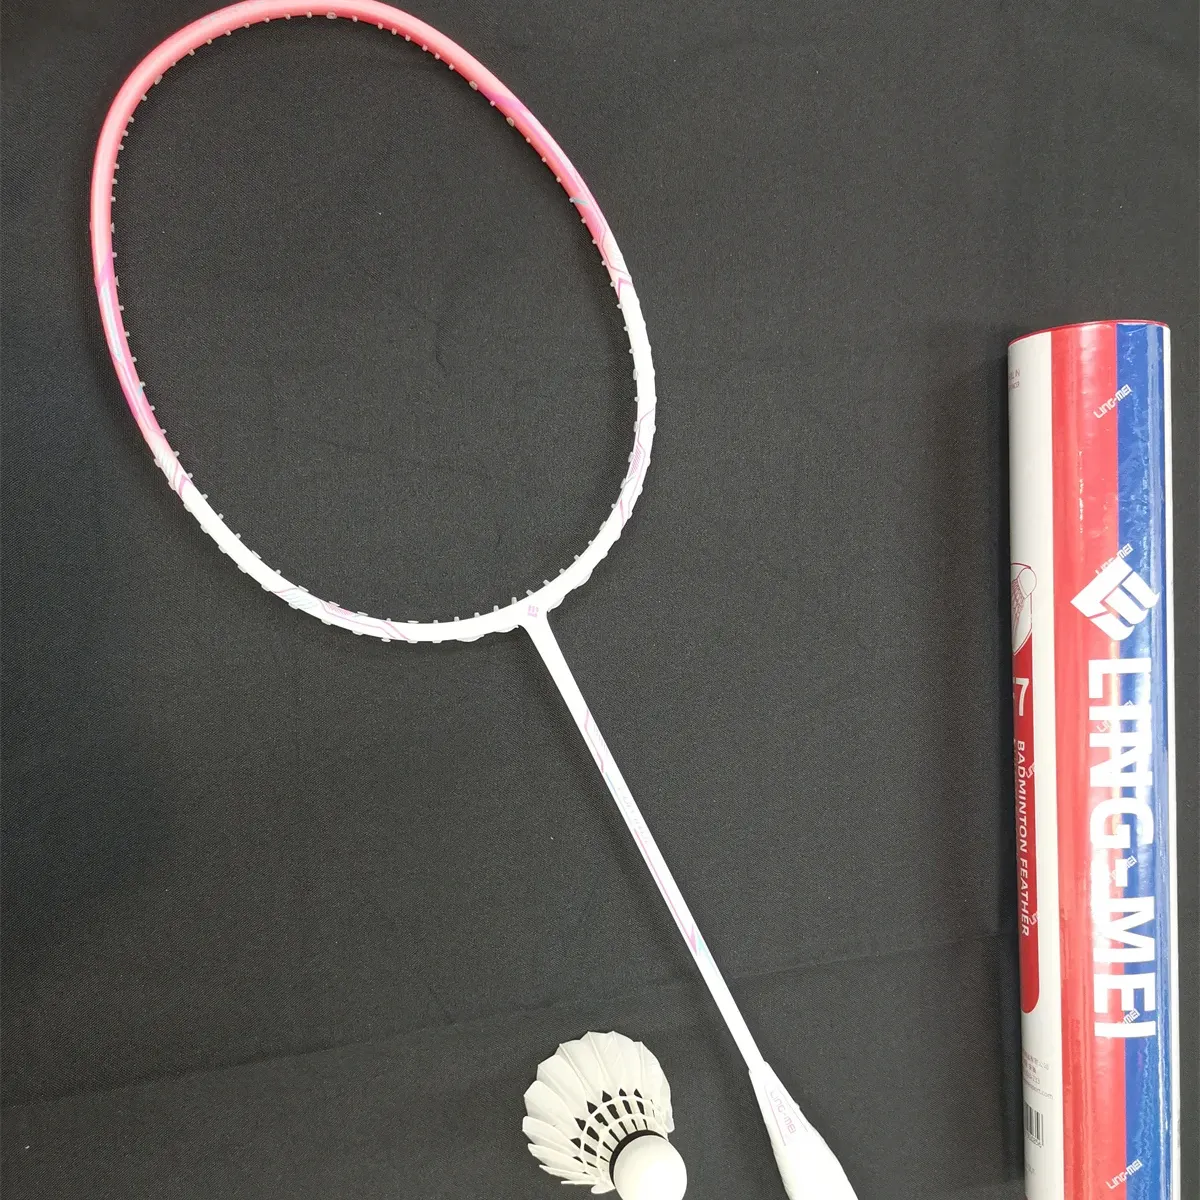 High Quality Single Package 4u 80-85g Badminton Racket OEM Available Good Quality and Price